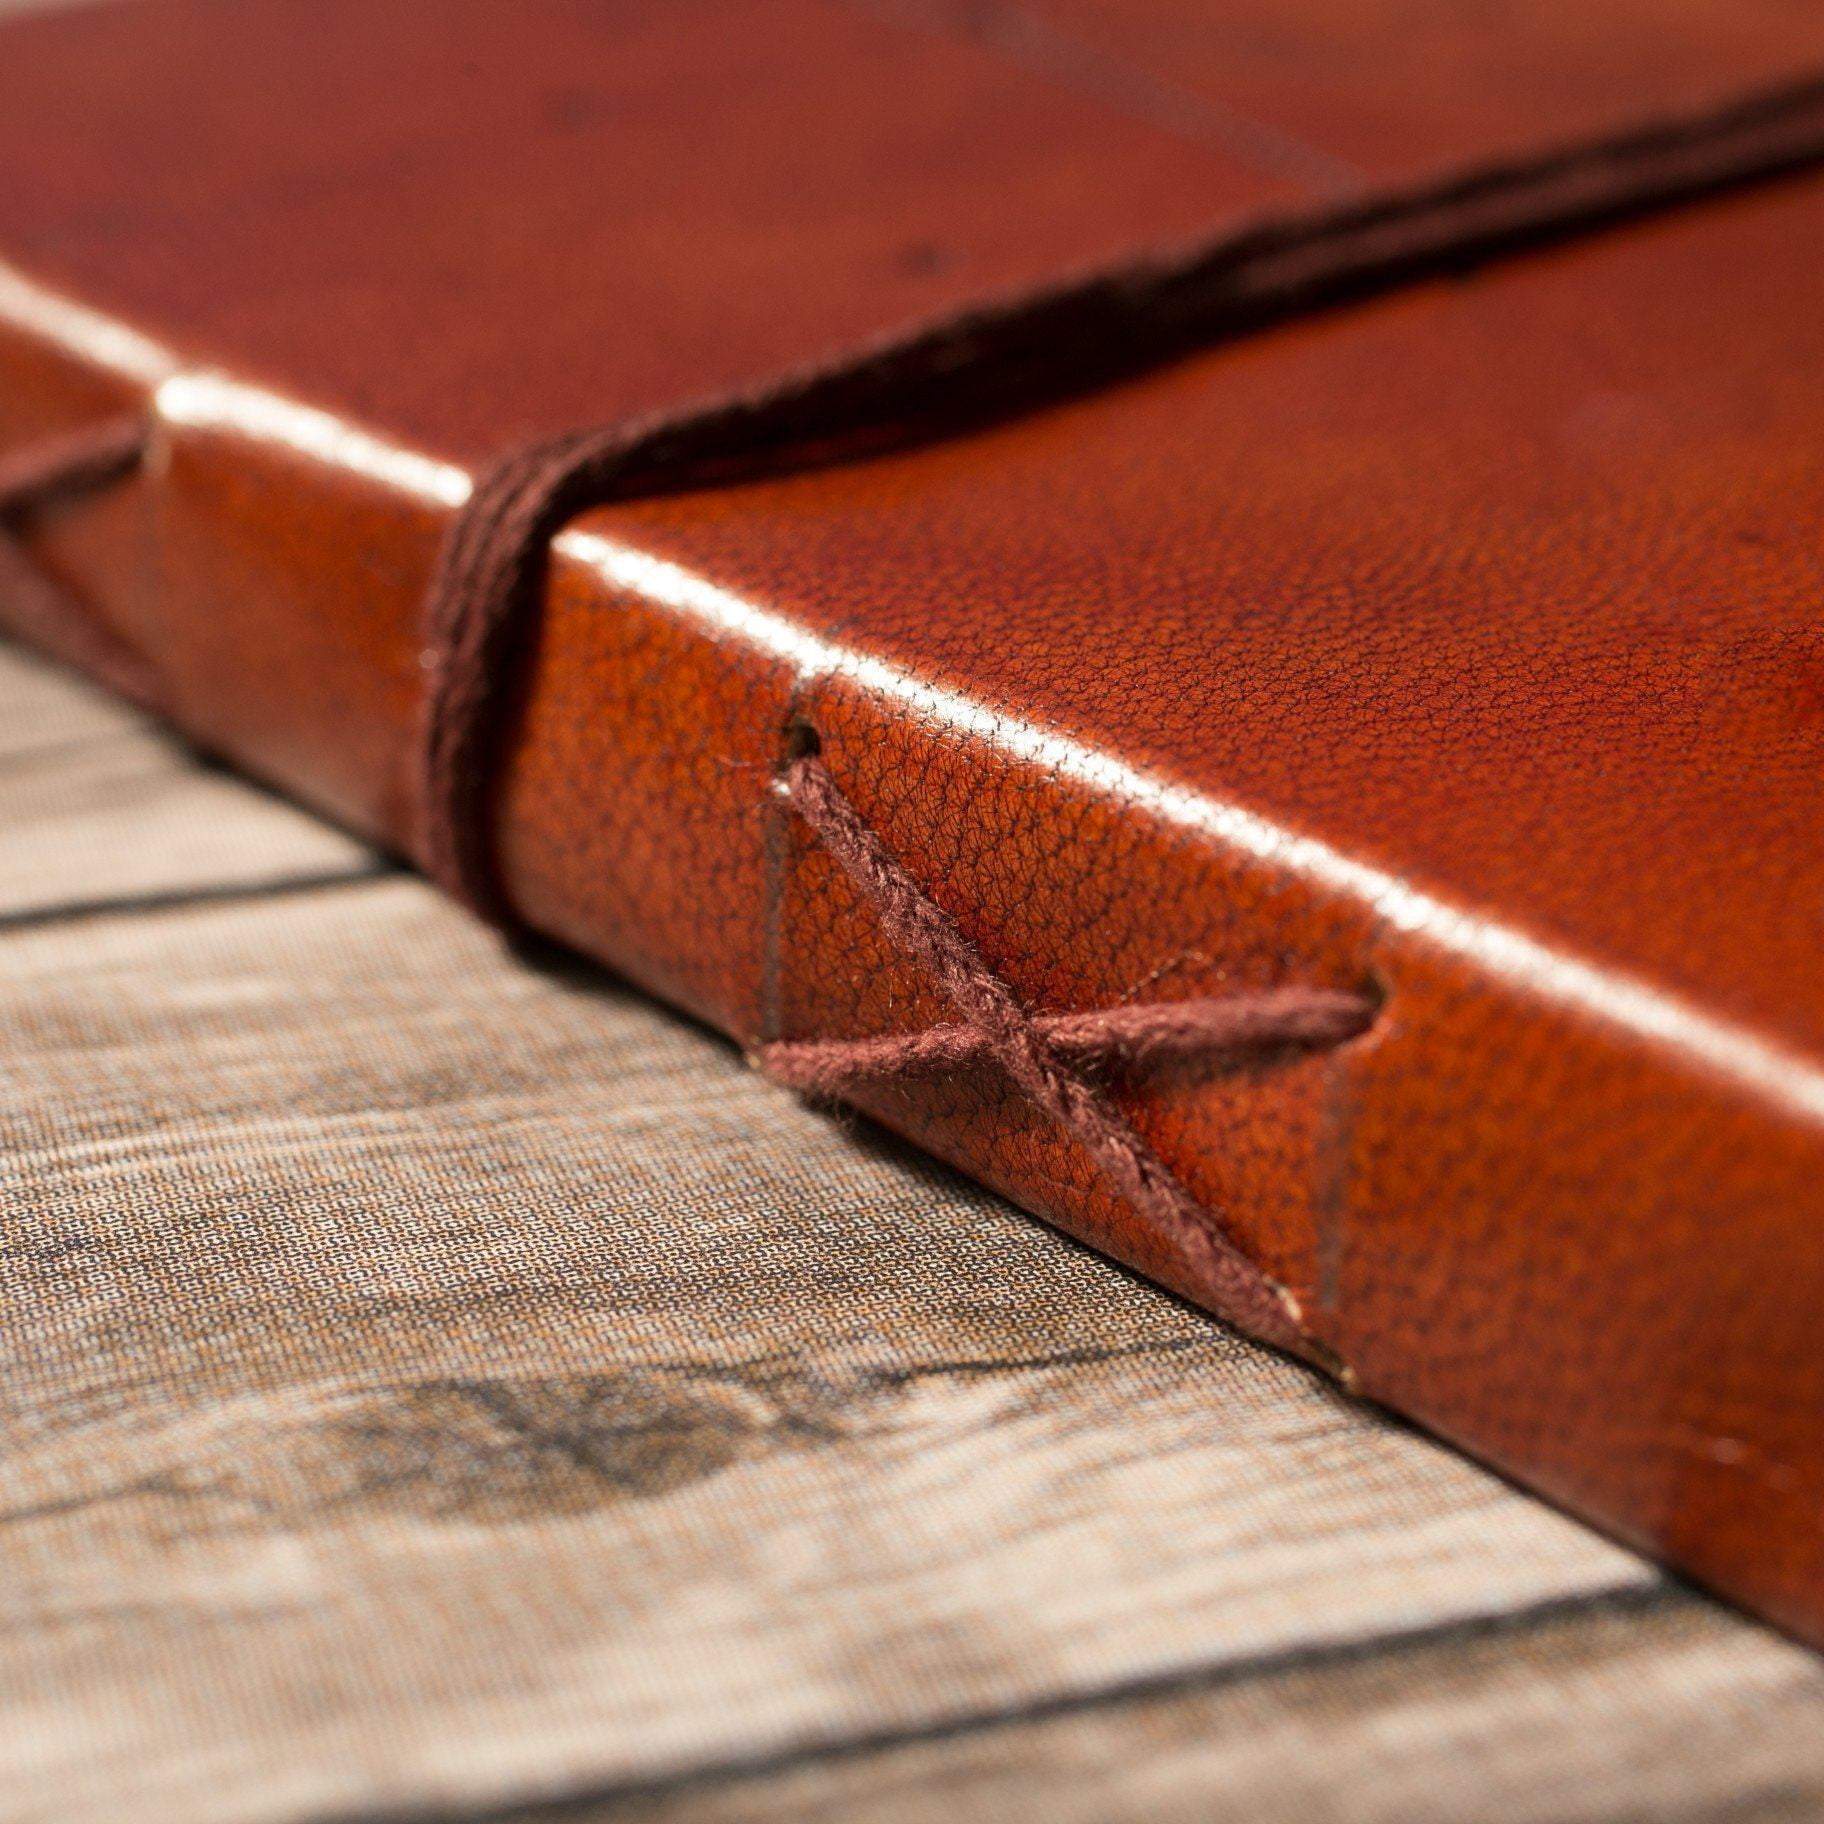 Another Adventure Handmade Leather Journal